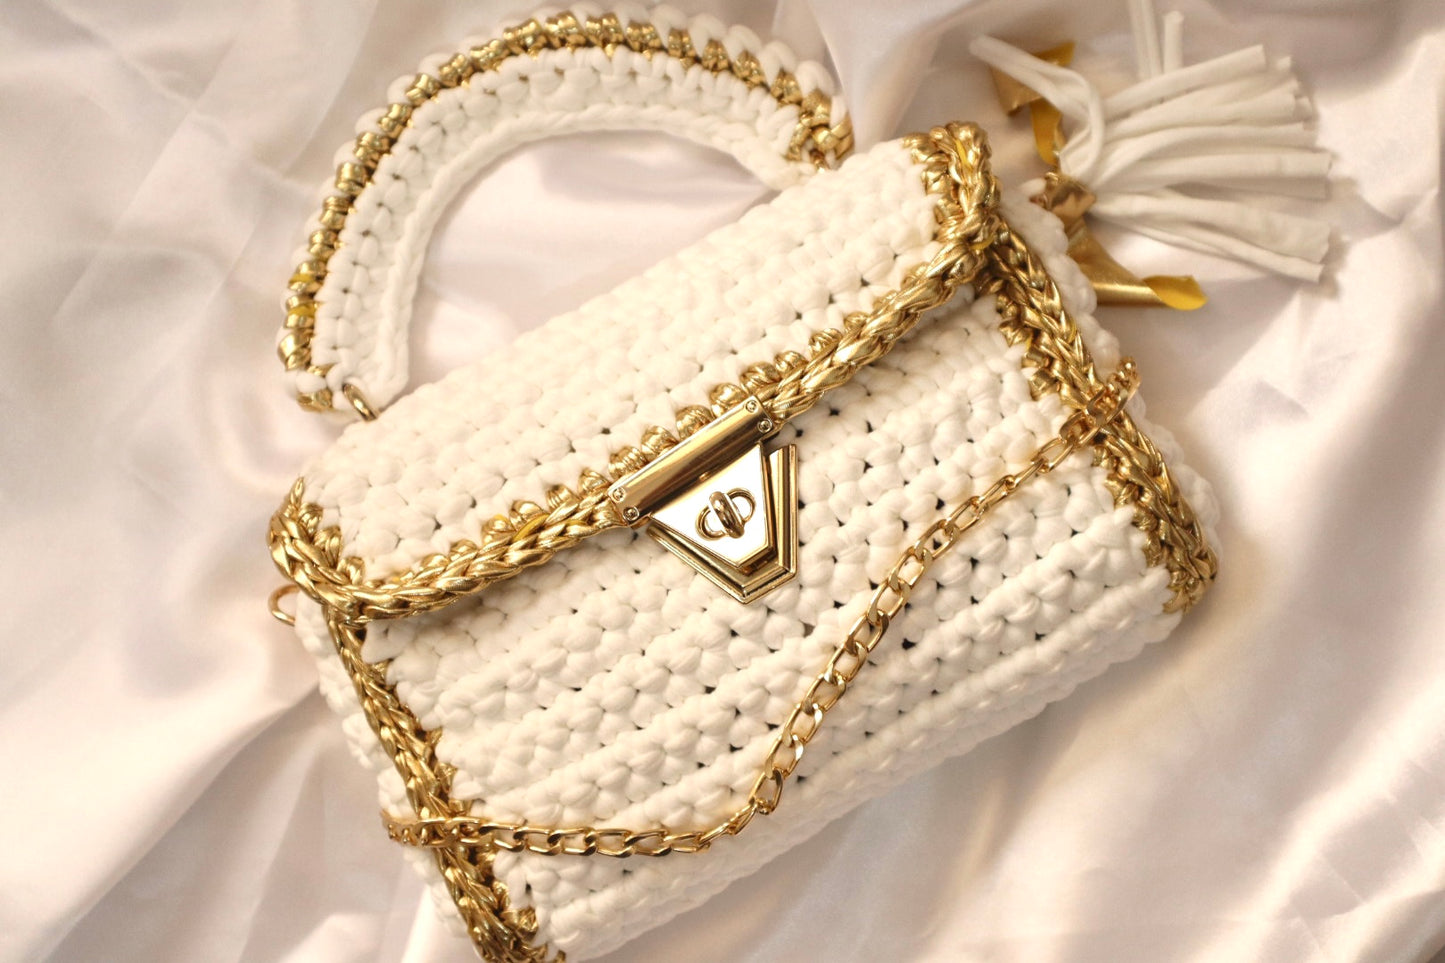 Luxurious White Crochet Handbag with Gold Accents